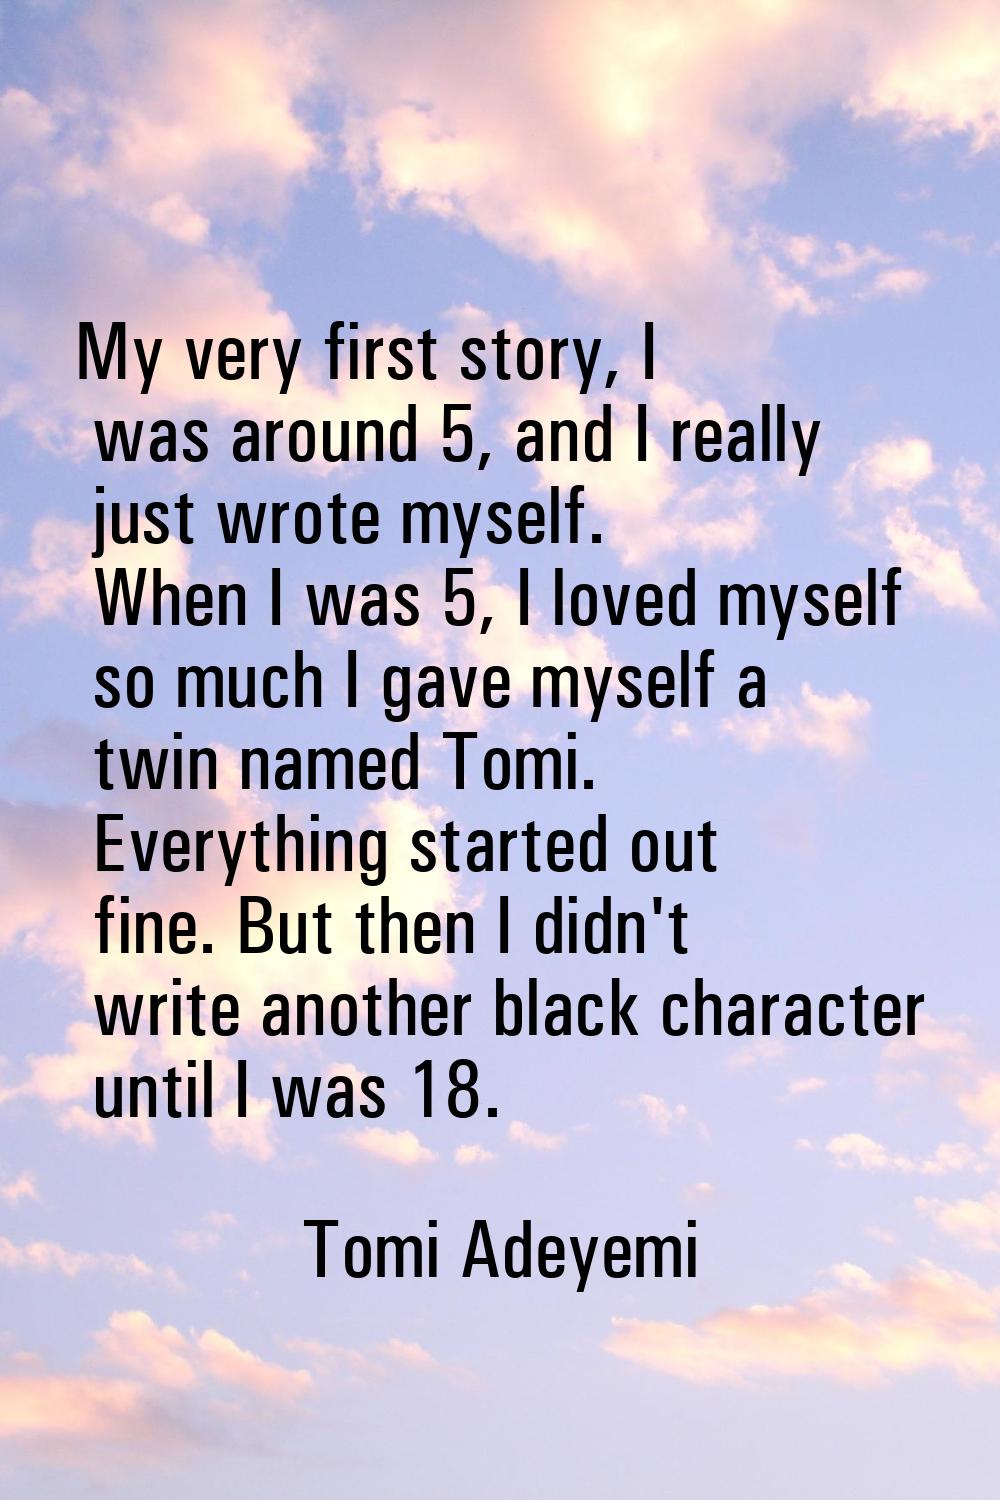 My very first story, I was around 5, and I really just wrote myself. When I was 5, I loved myself s